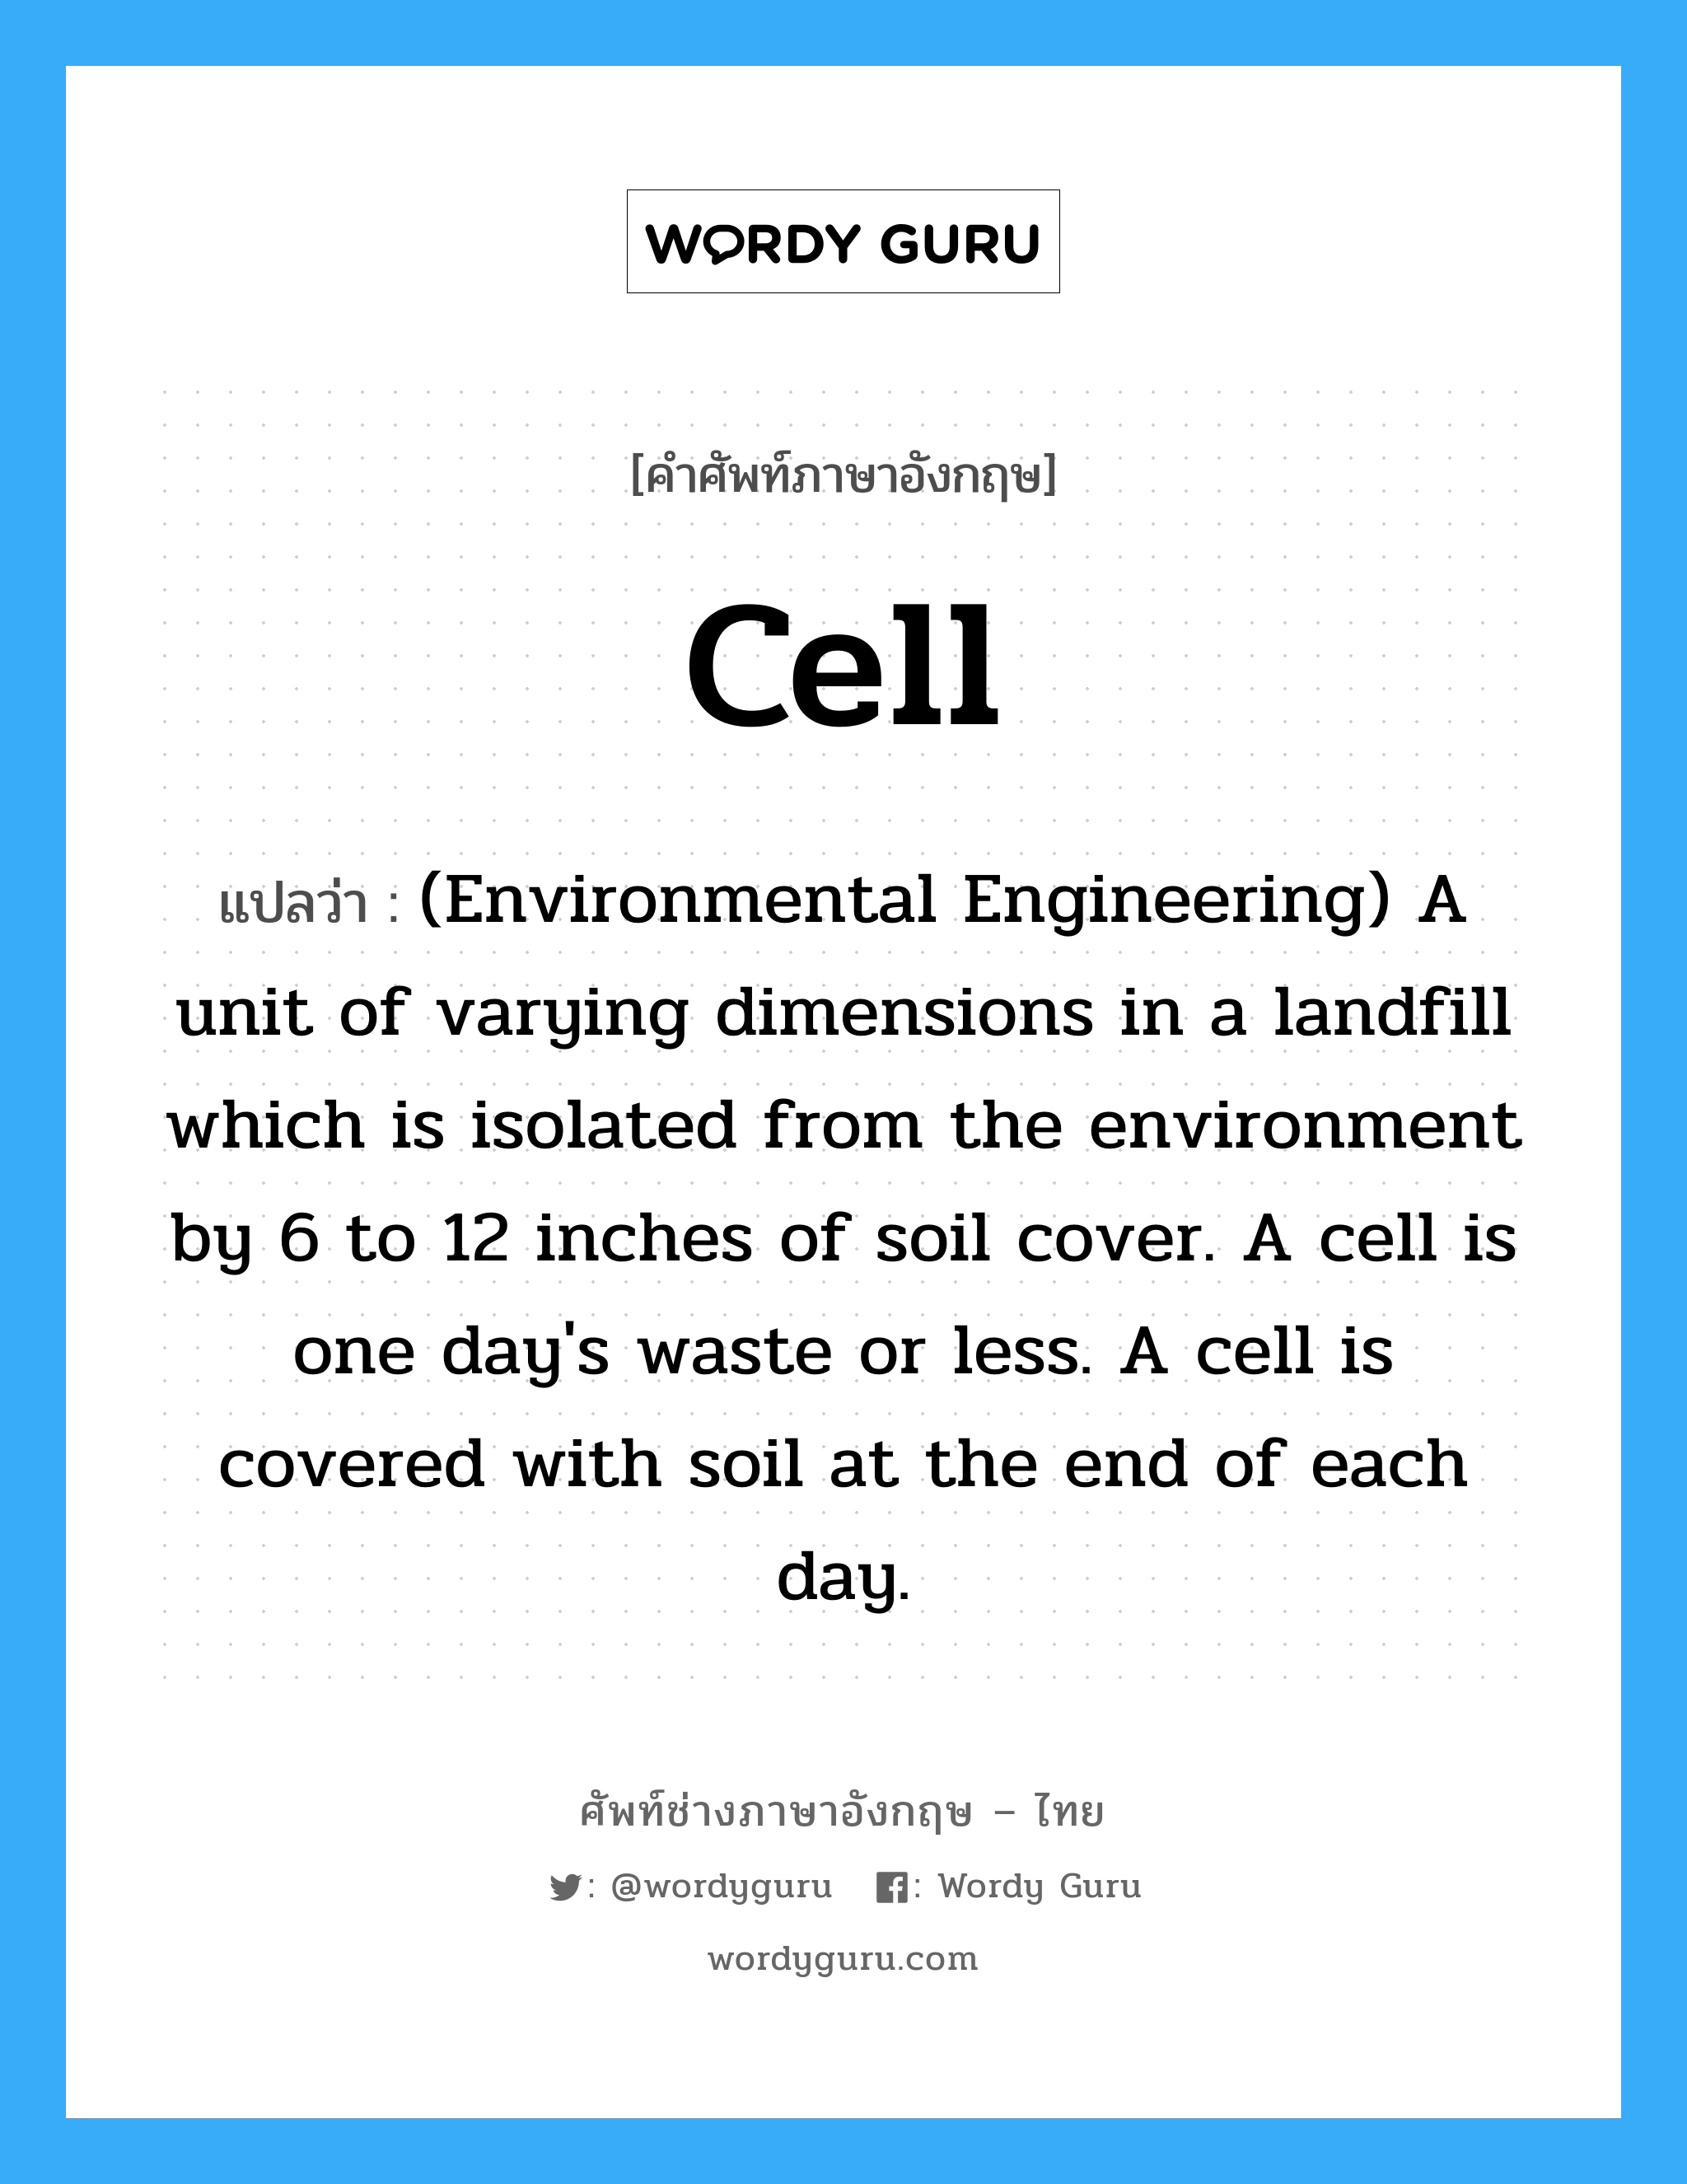 (Environmental Engineering) A unit of varying dimensions in a landfill which is isolated from the environment by 6 to 12 inches of soil cover. A cell is one day's waste or less. A cell is covered with soil at the end of each day. ภาษาอังกฤษ?, คำศัพท์ช่างภาษาอังกฤษ - ไทย (Environmental Engineering) A unit of varying dimensions in a landfill which is isolated from the environment by 6 to 12 inches of soil cover. A cell is one day's waste or less. A cell is covered with soil at the end of each day. คำศัพท์ภาษาอังกฤษ (Environmental Engineering) A unit of varying dimensions in a landfill which is isolated from the environment by 6 to 12 inches of soil cover. A cell is one day's waste or less. A cell is covered with soil at the end of each day. แปลว่า Cell